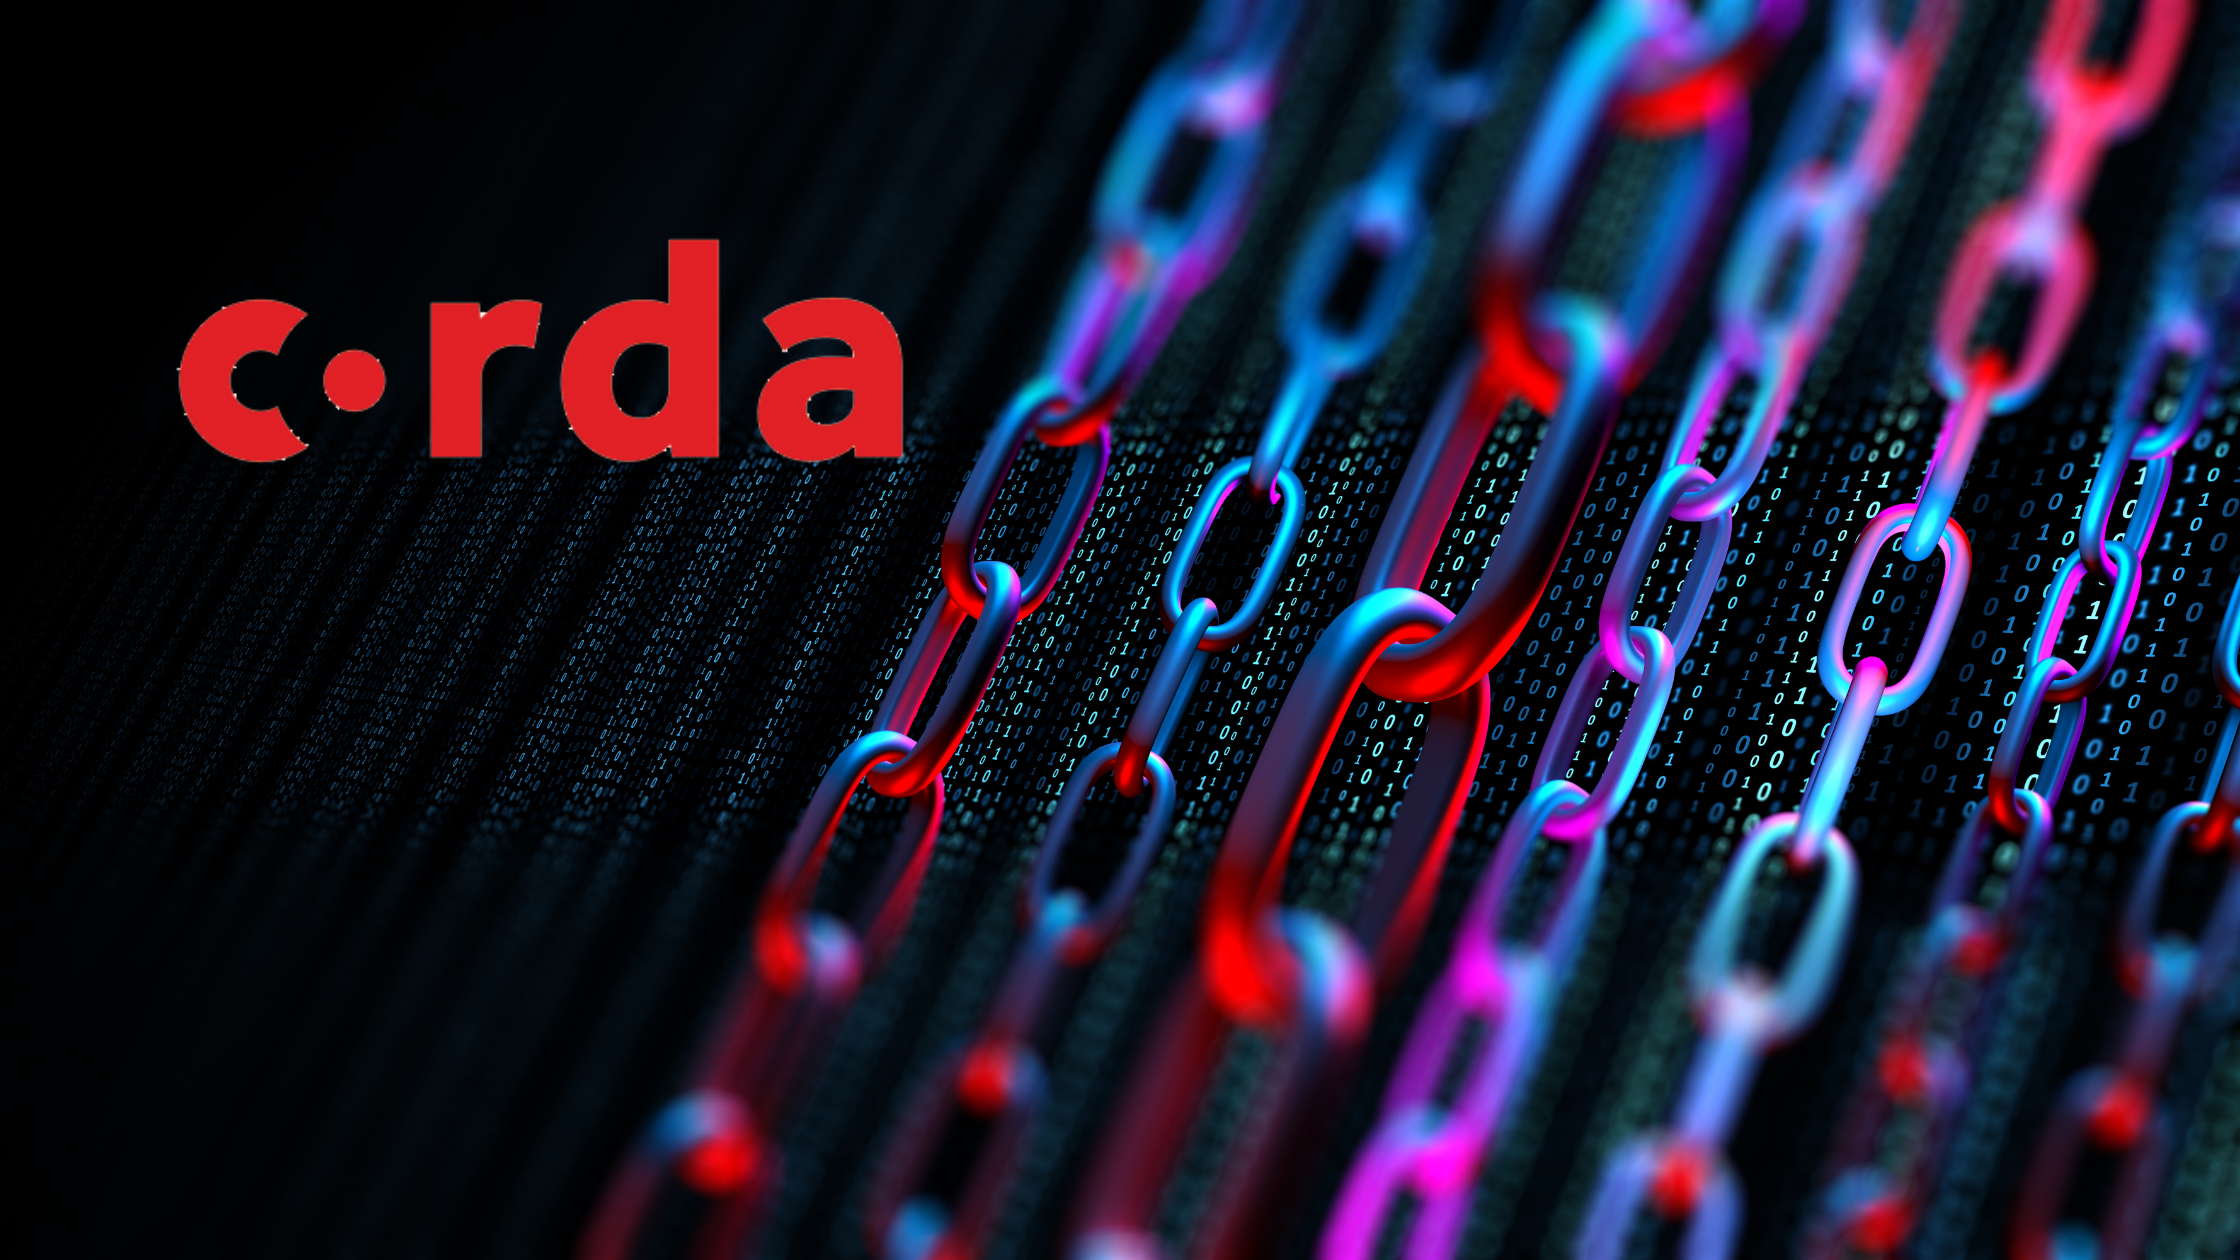 What is corda